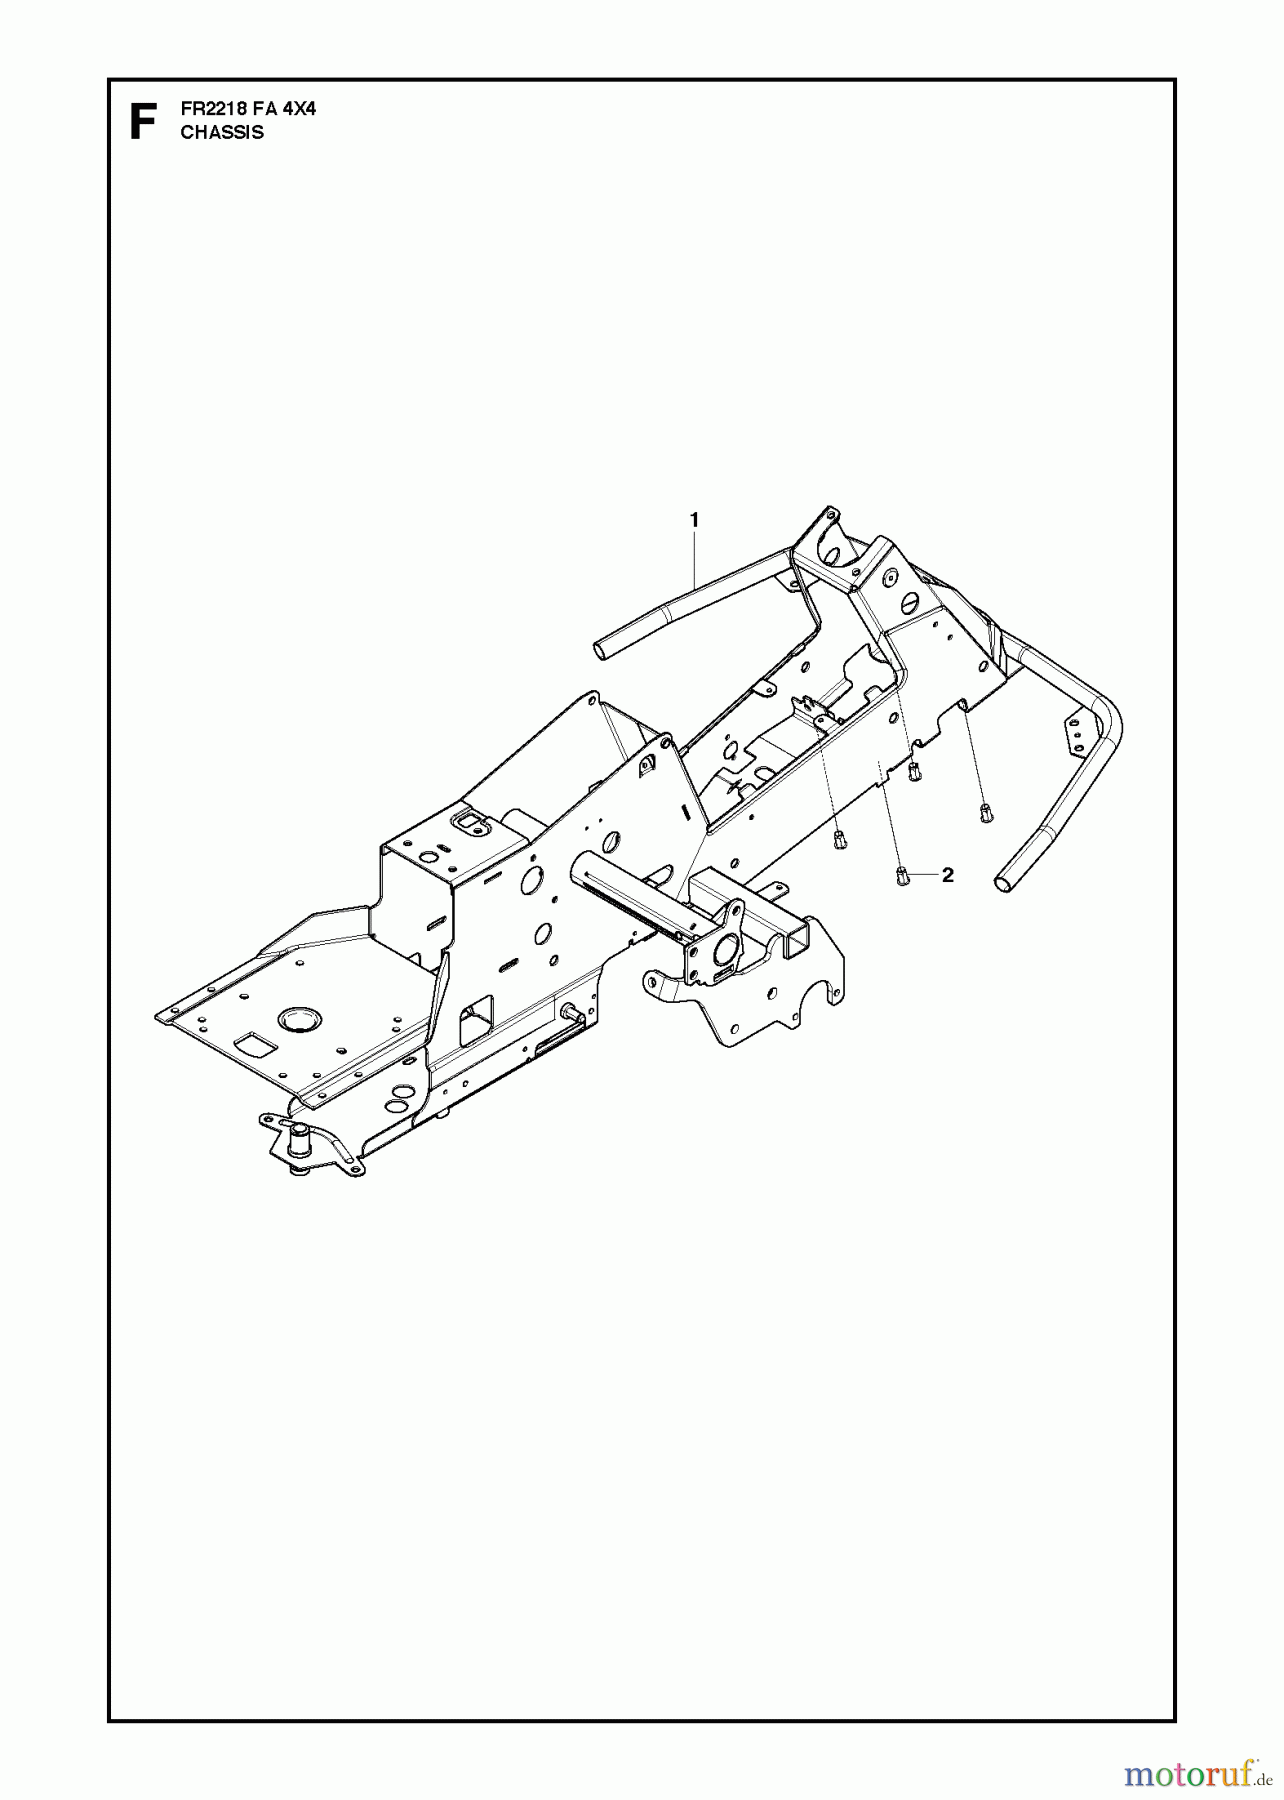  Jonsered Reitermäher FR2218 FA 4x4 (966773701) - Jonsered Rear-Engine Riding Mower (2012) CHASSIS ENCLOSURES